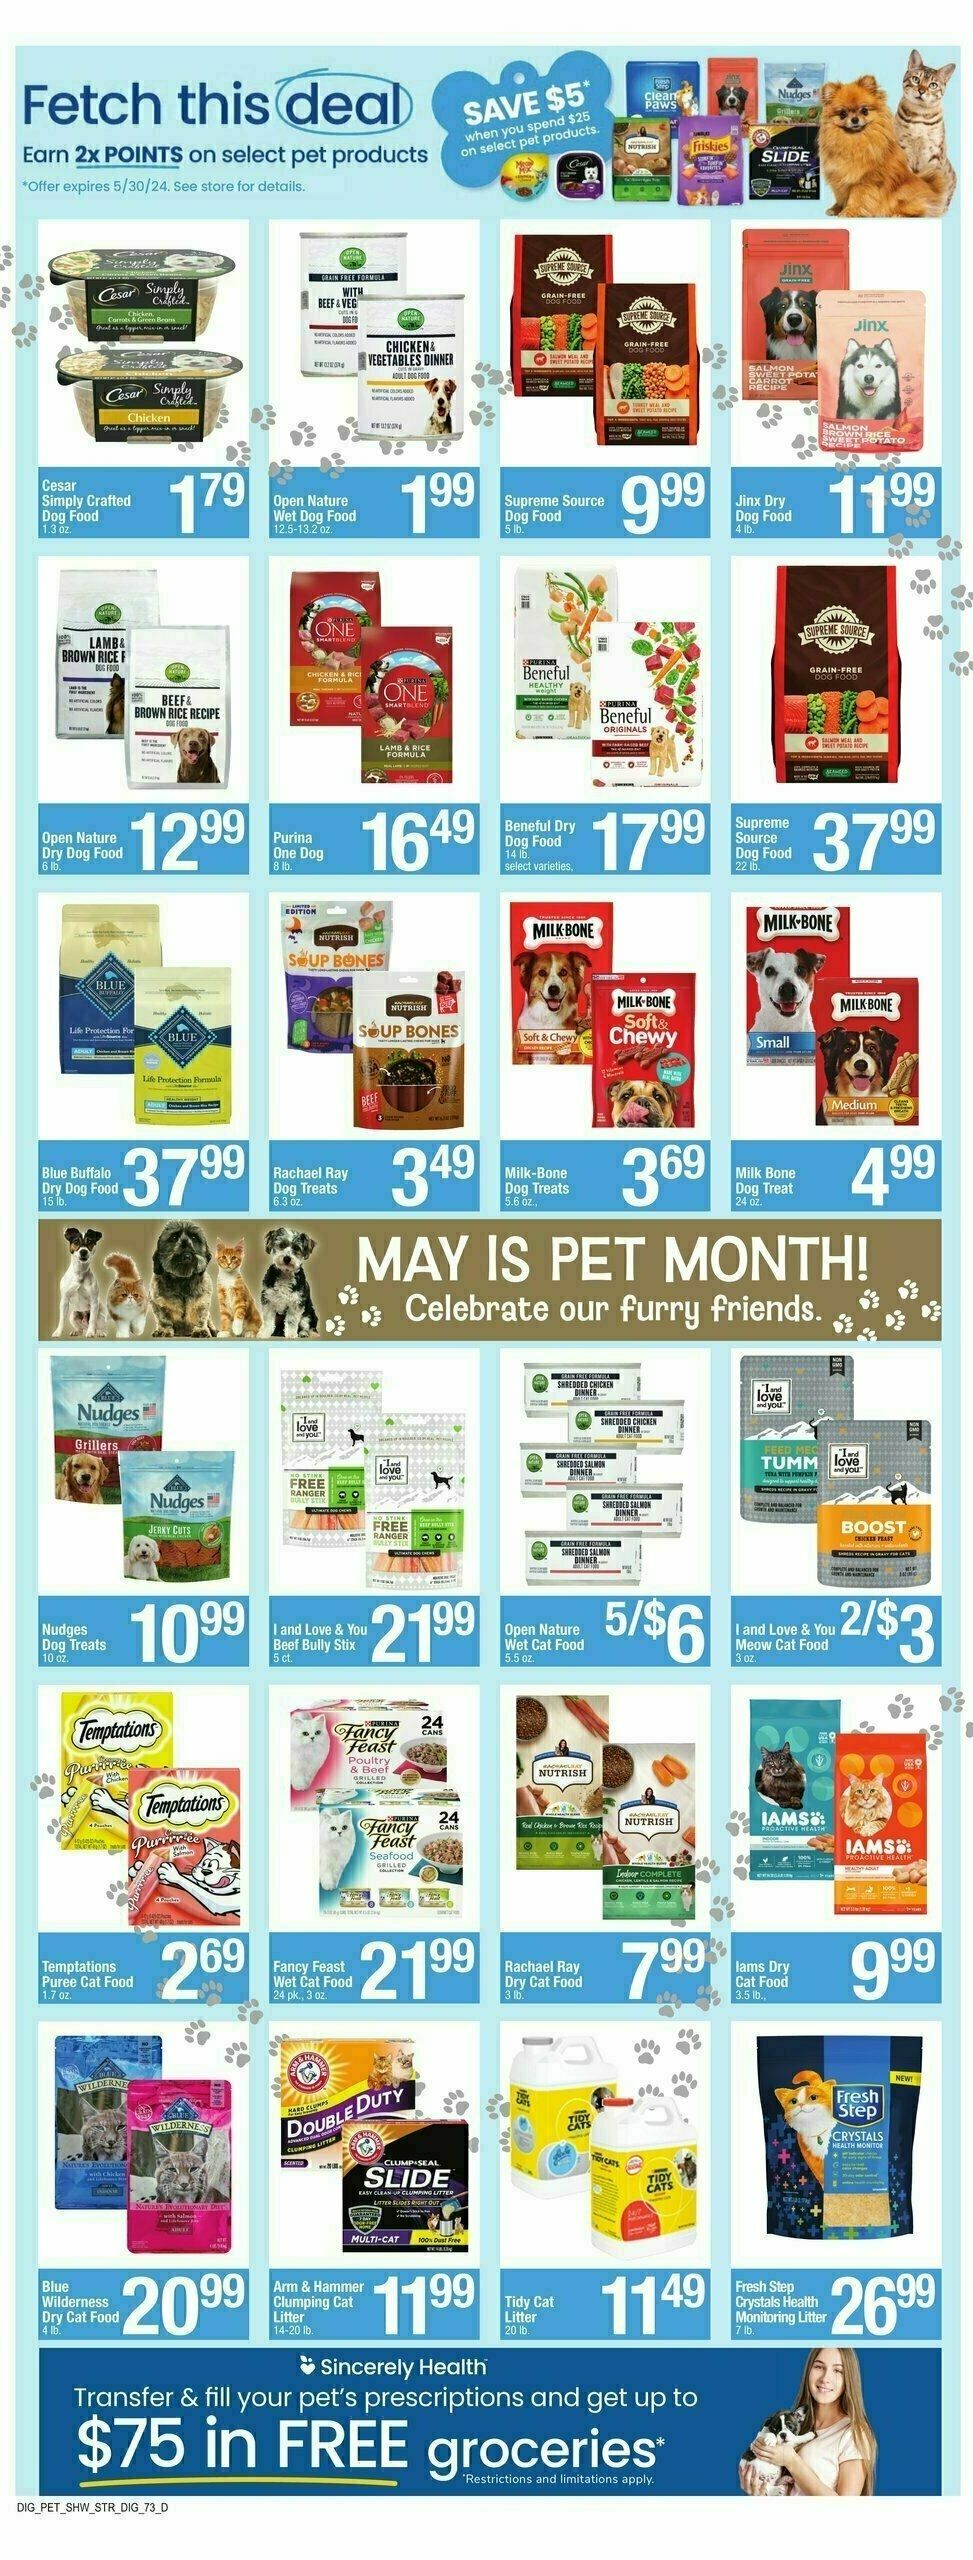 Star Market Weekly Ad from May 10